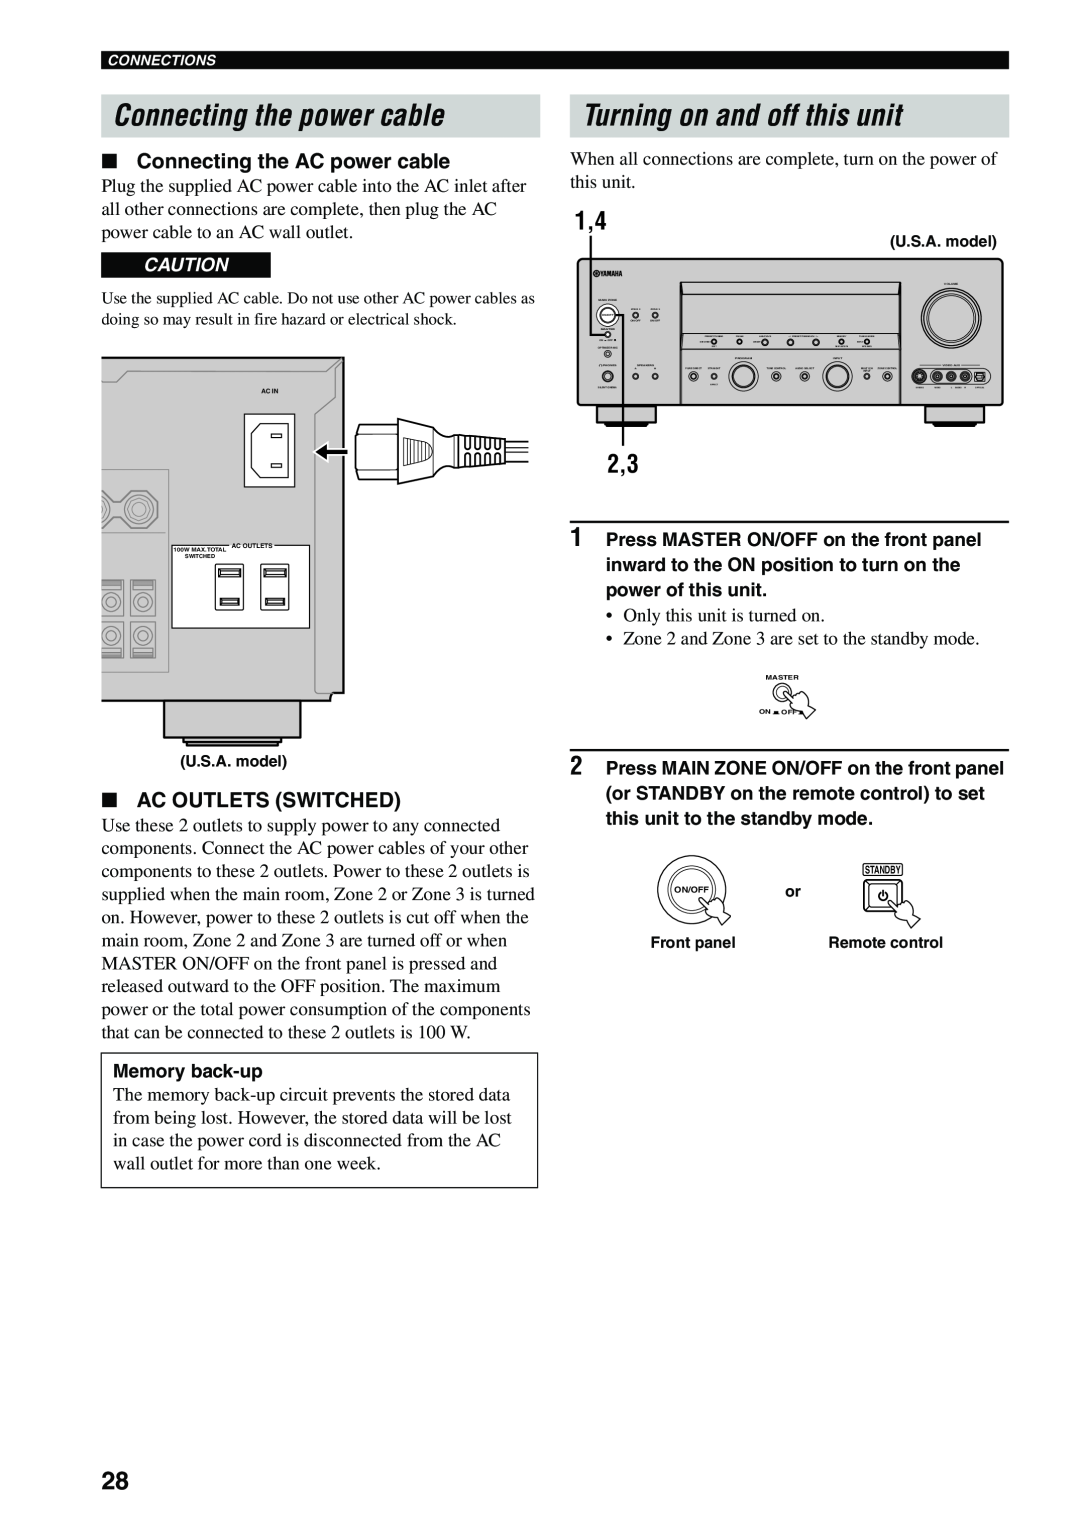 Yamaha HTR-5990 owner manual Connecting the power cable, Turning on and off this unit, Connecting the AC power cable 